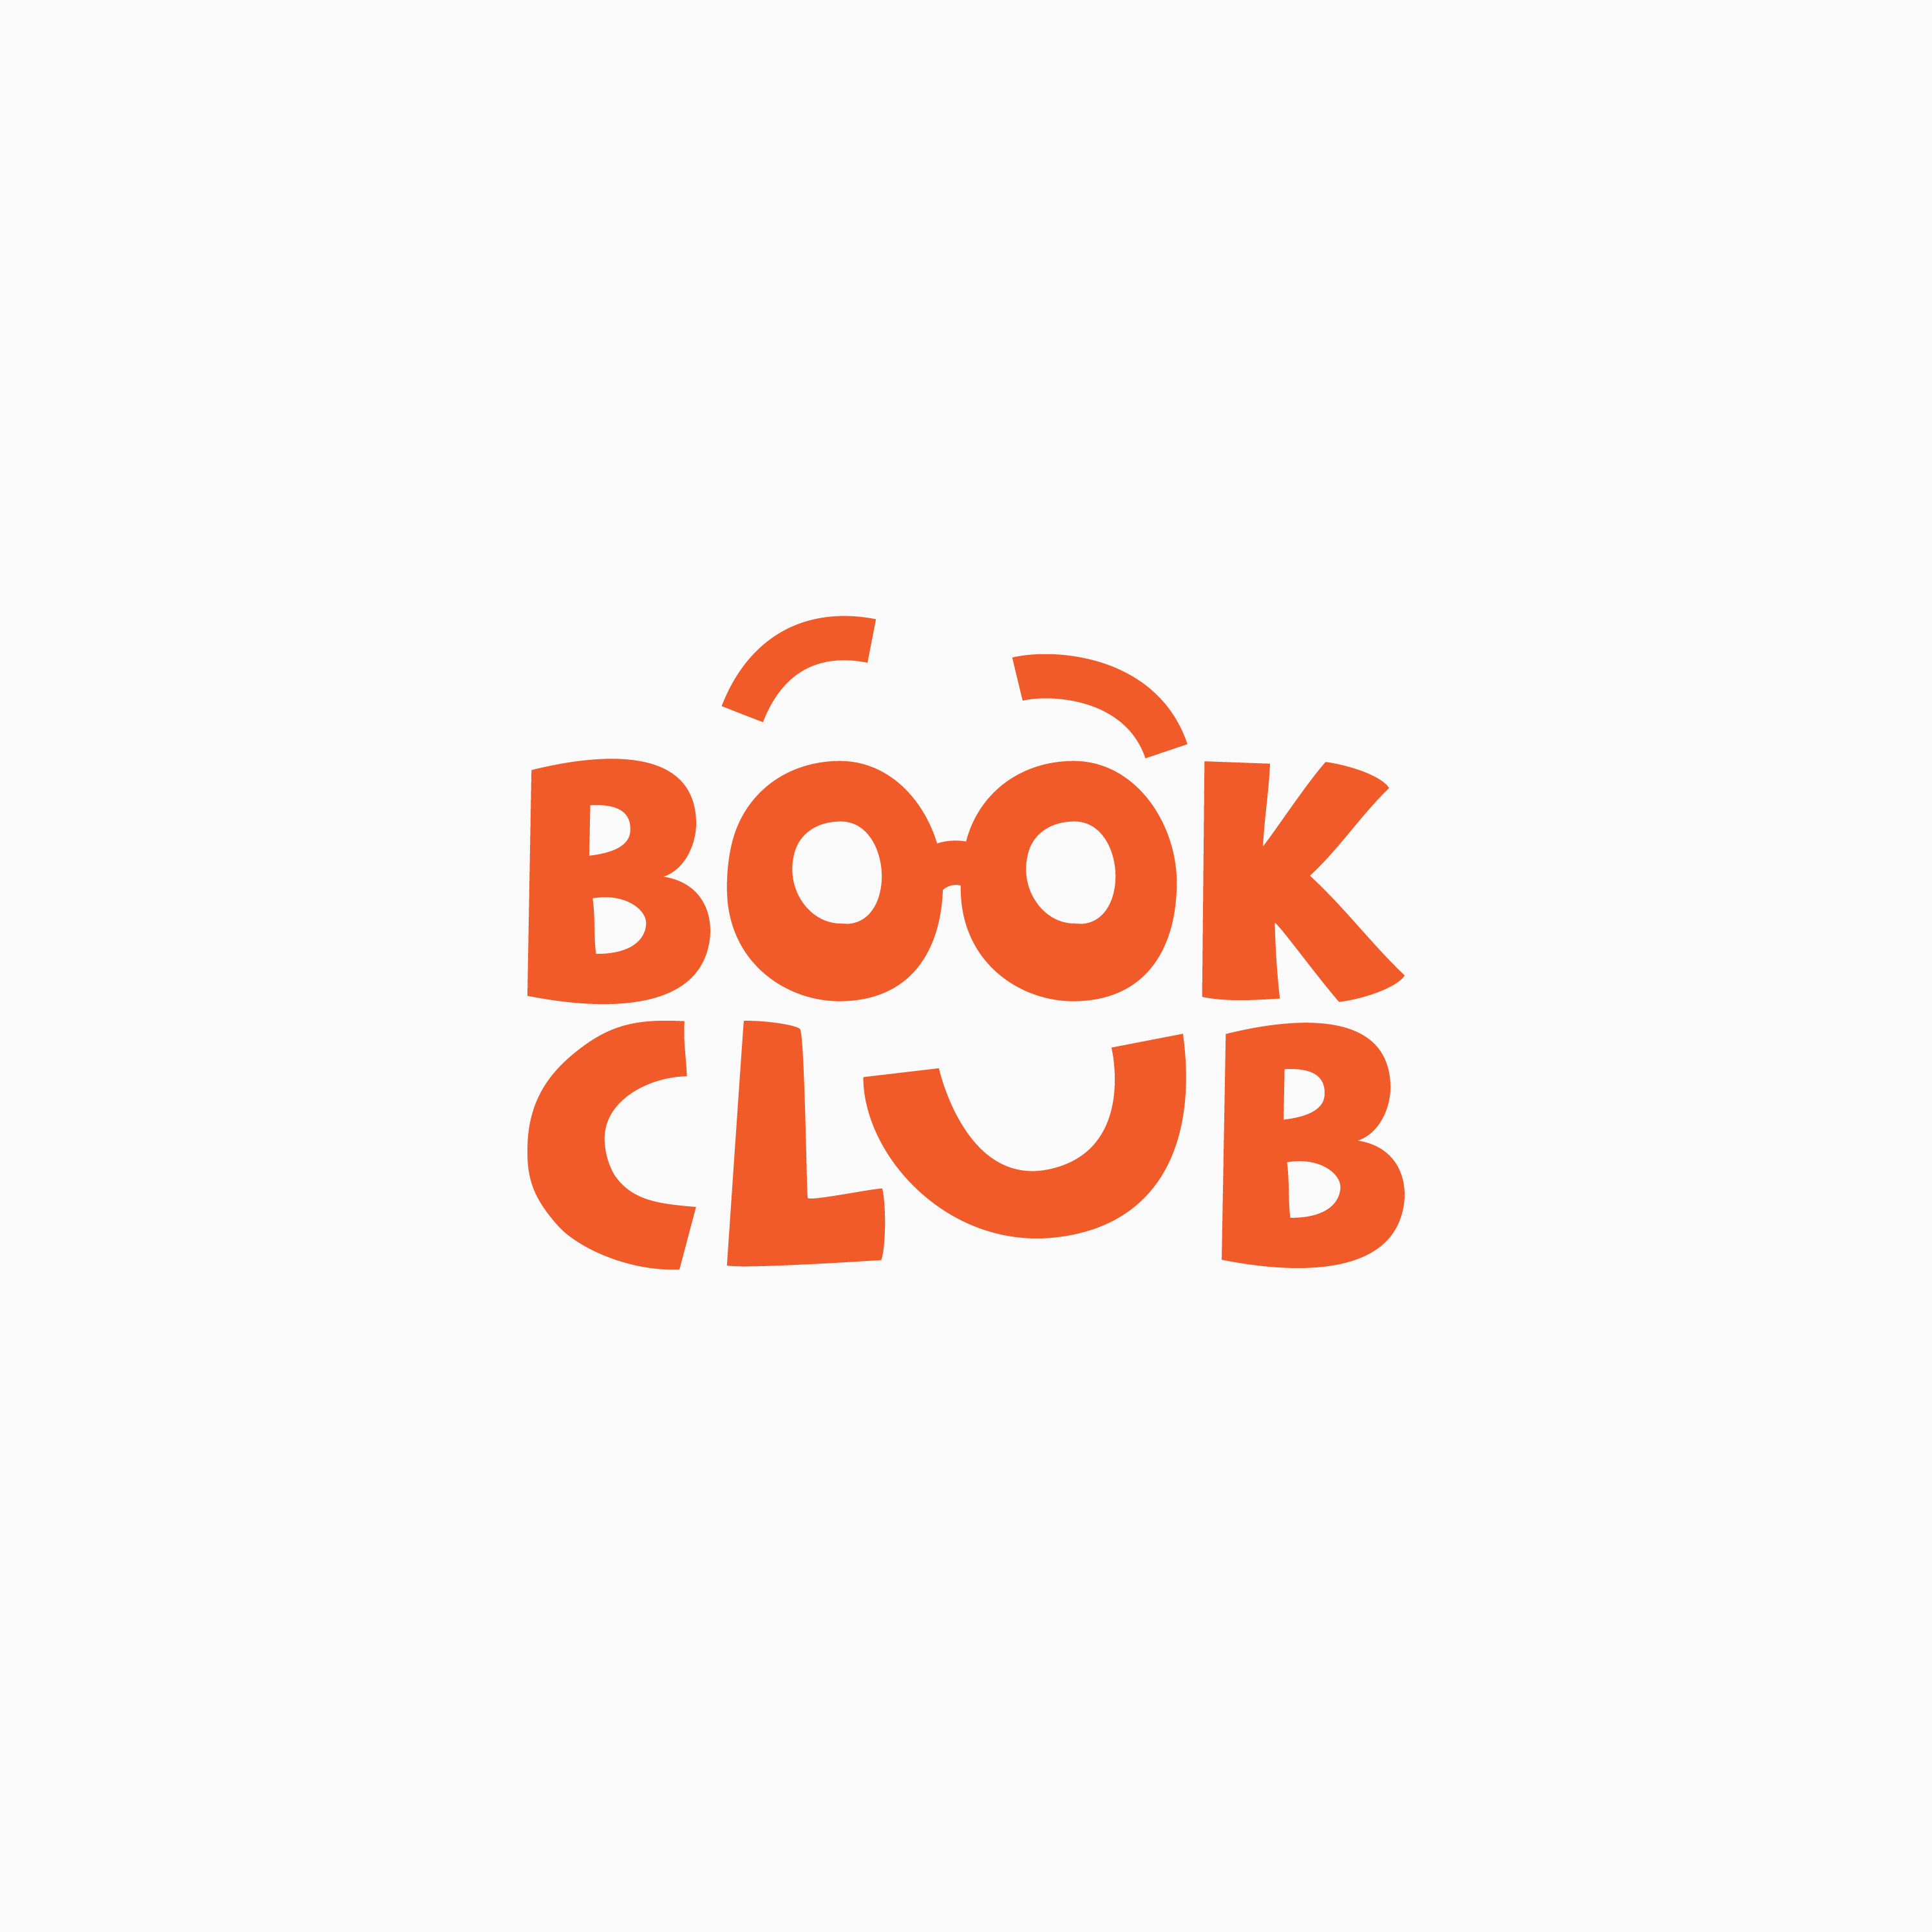 The words "book Club" with a smiley face